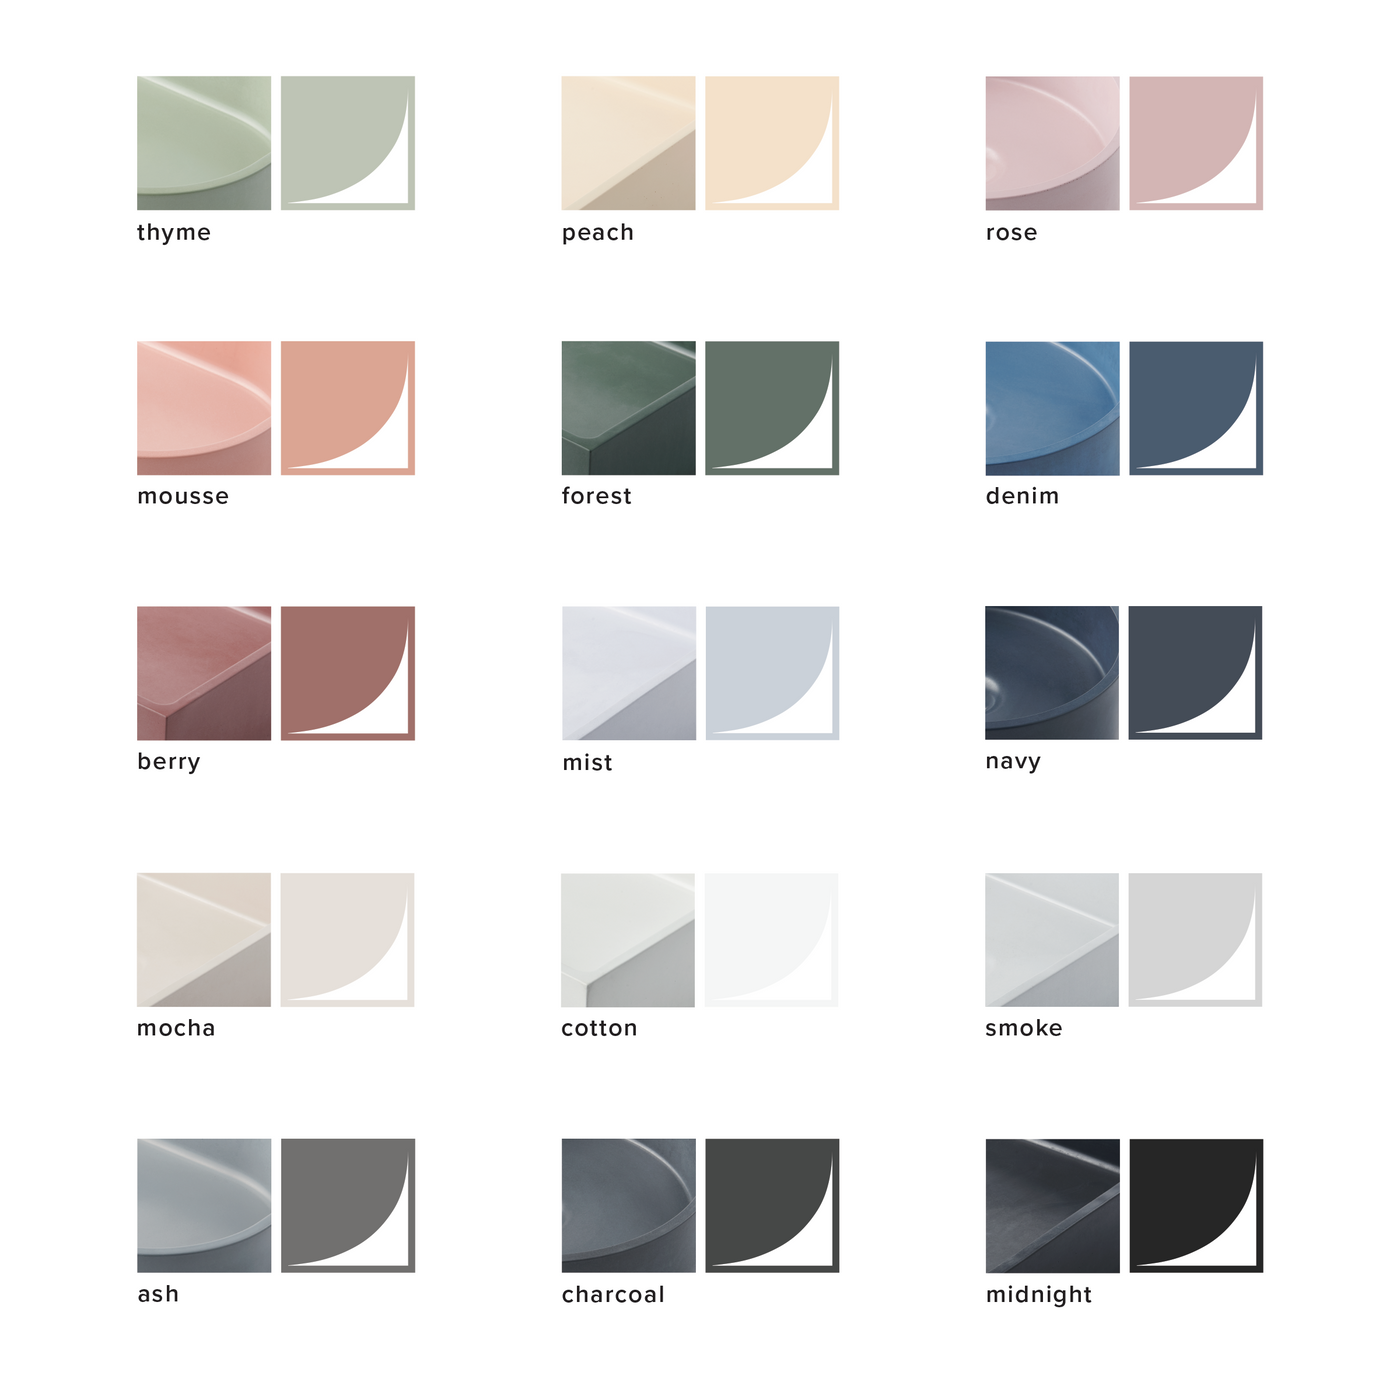 A bunch of different shades of different colors from mudd. concrete's Yarra Basin SM Affix.